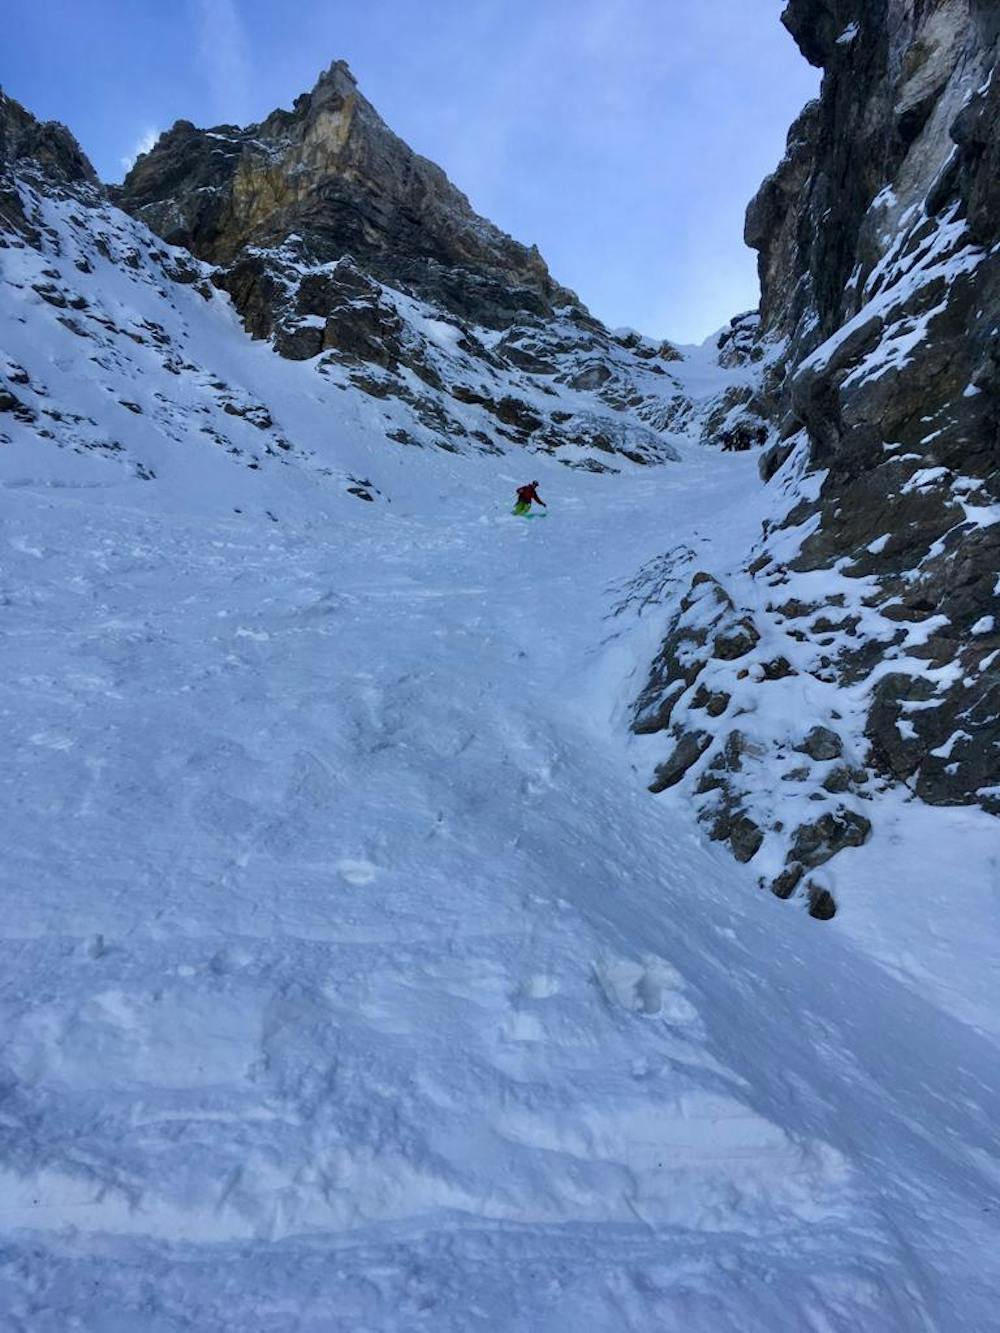 The first few turns in the couloir